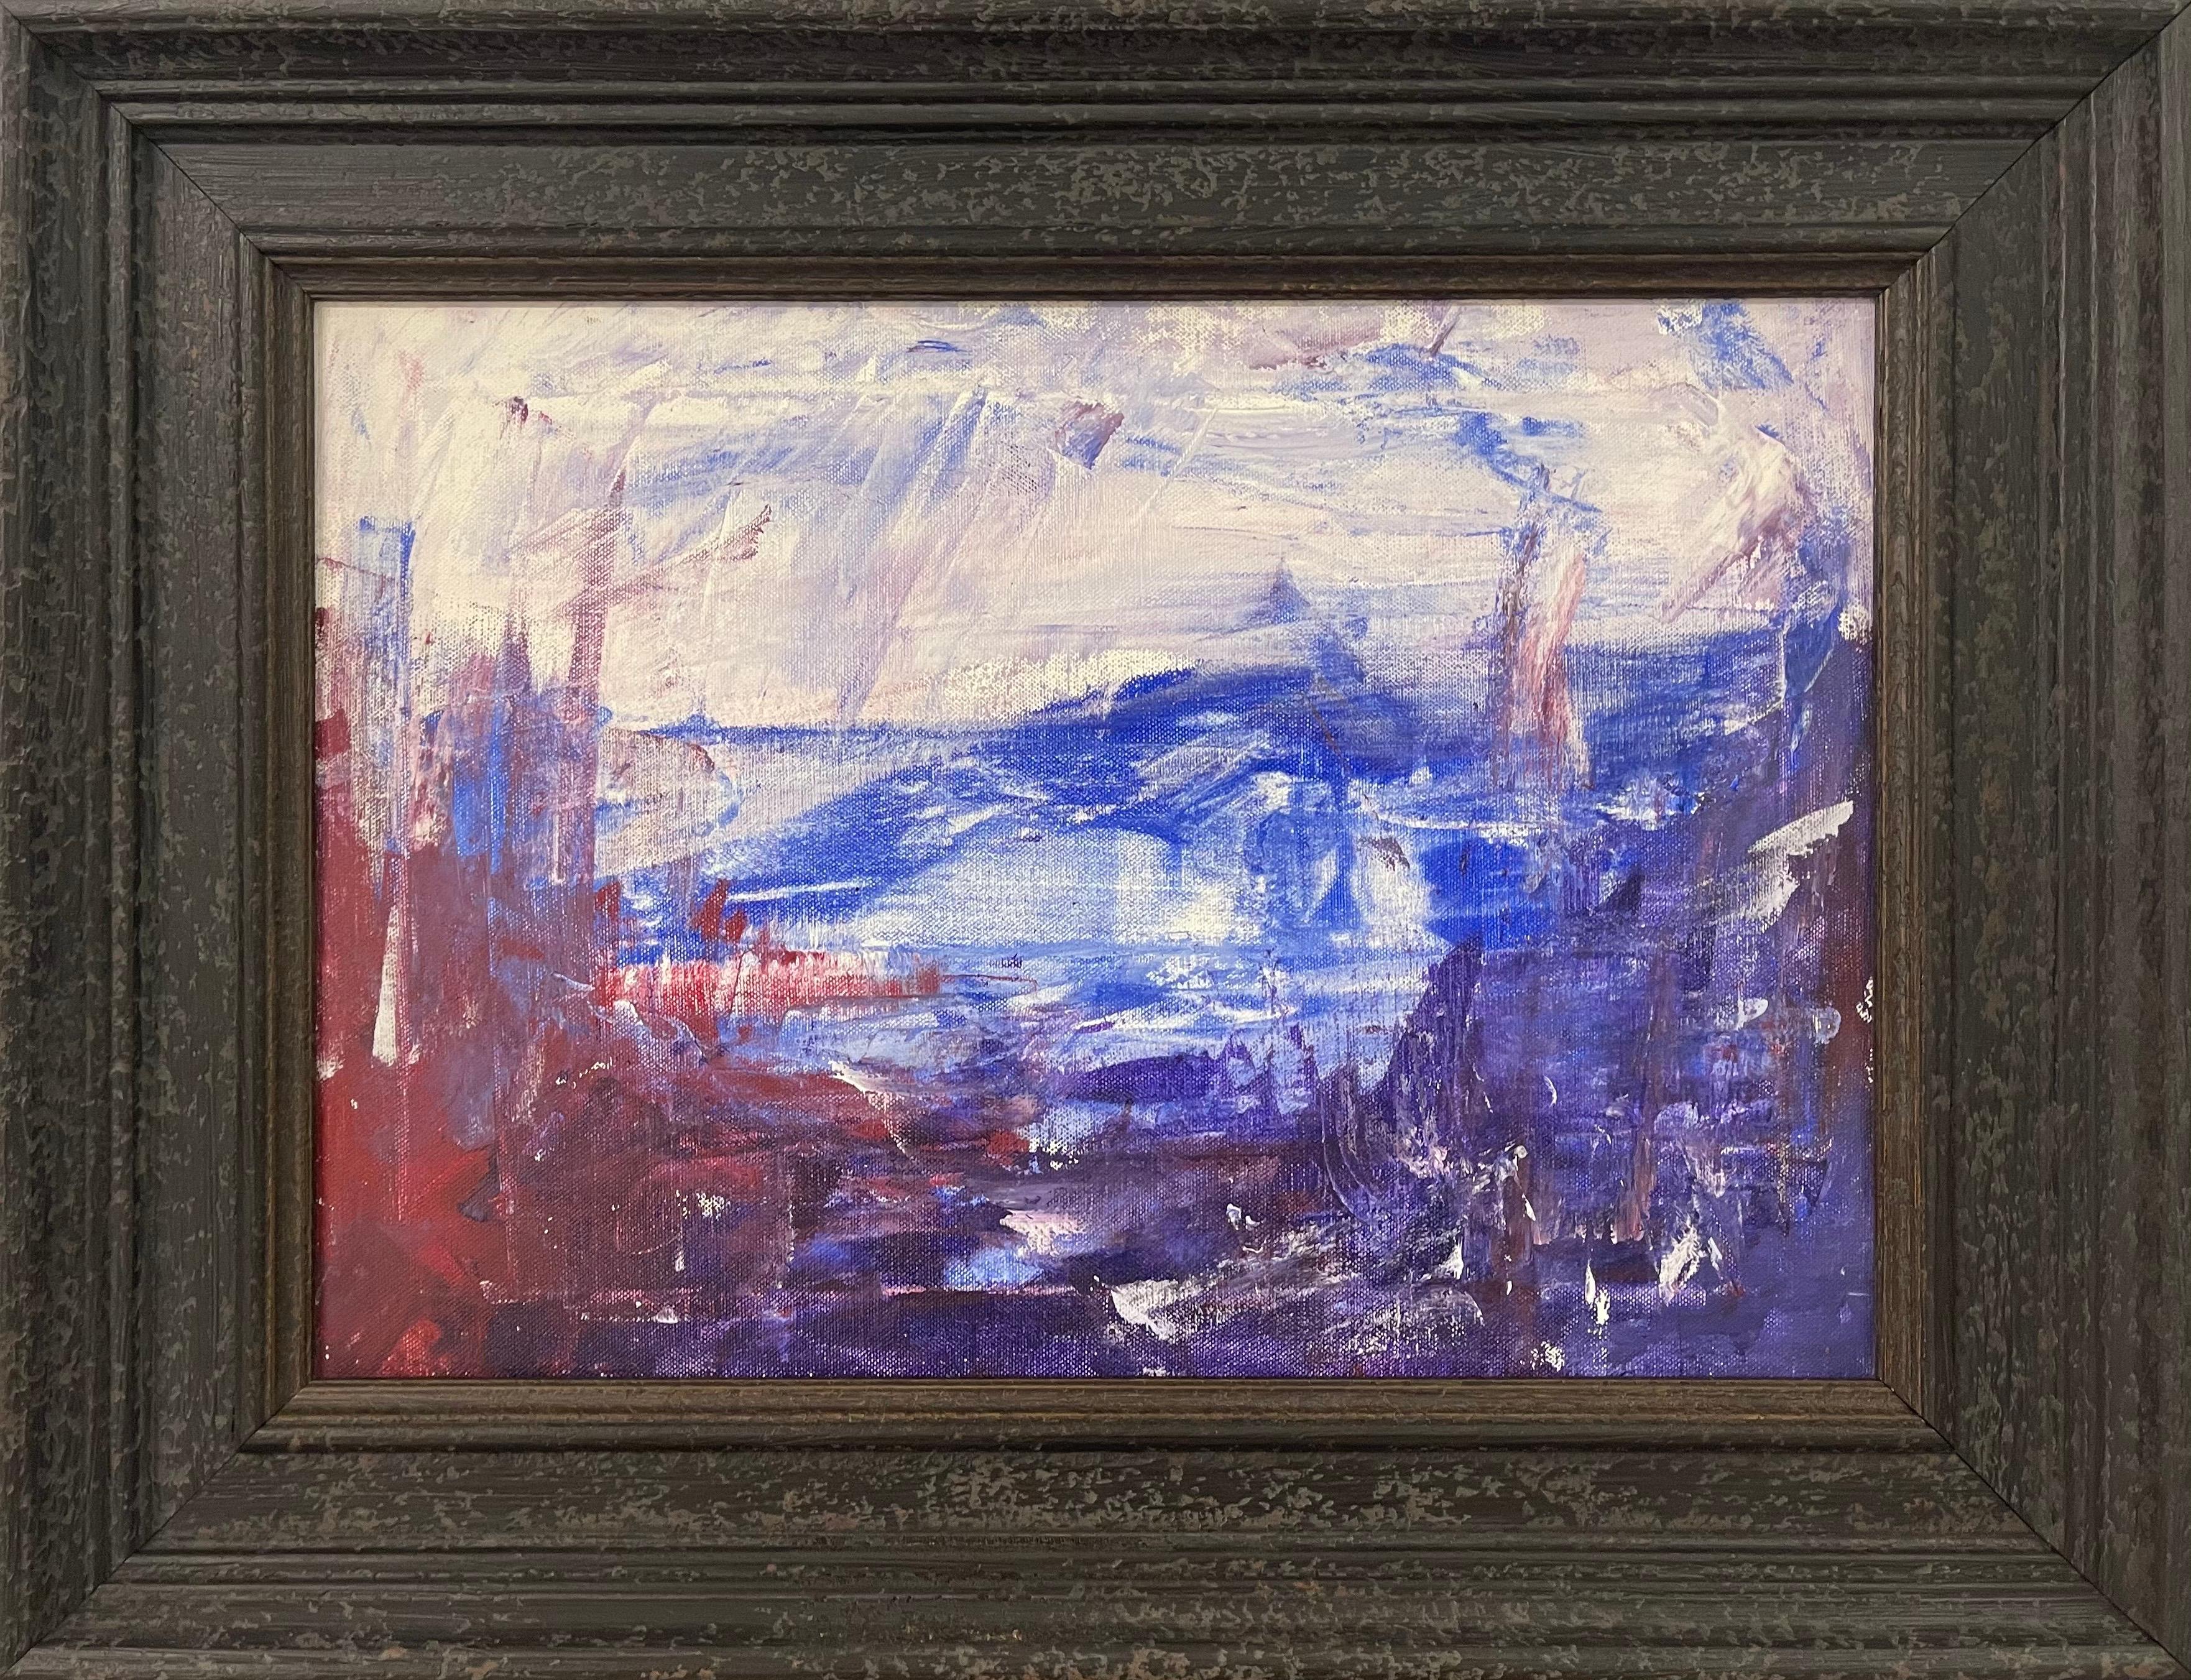 Blue Mountain Abstract Expressionist Painting by Contemporary British Artist